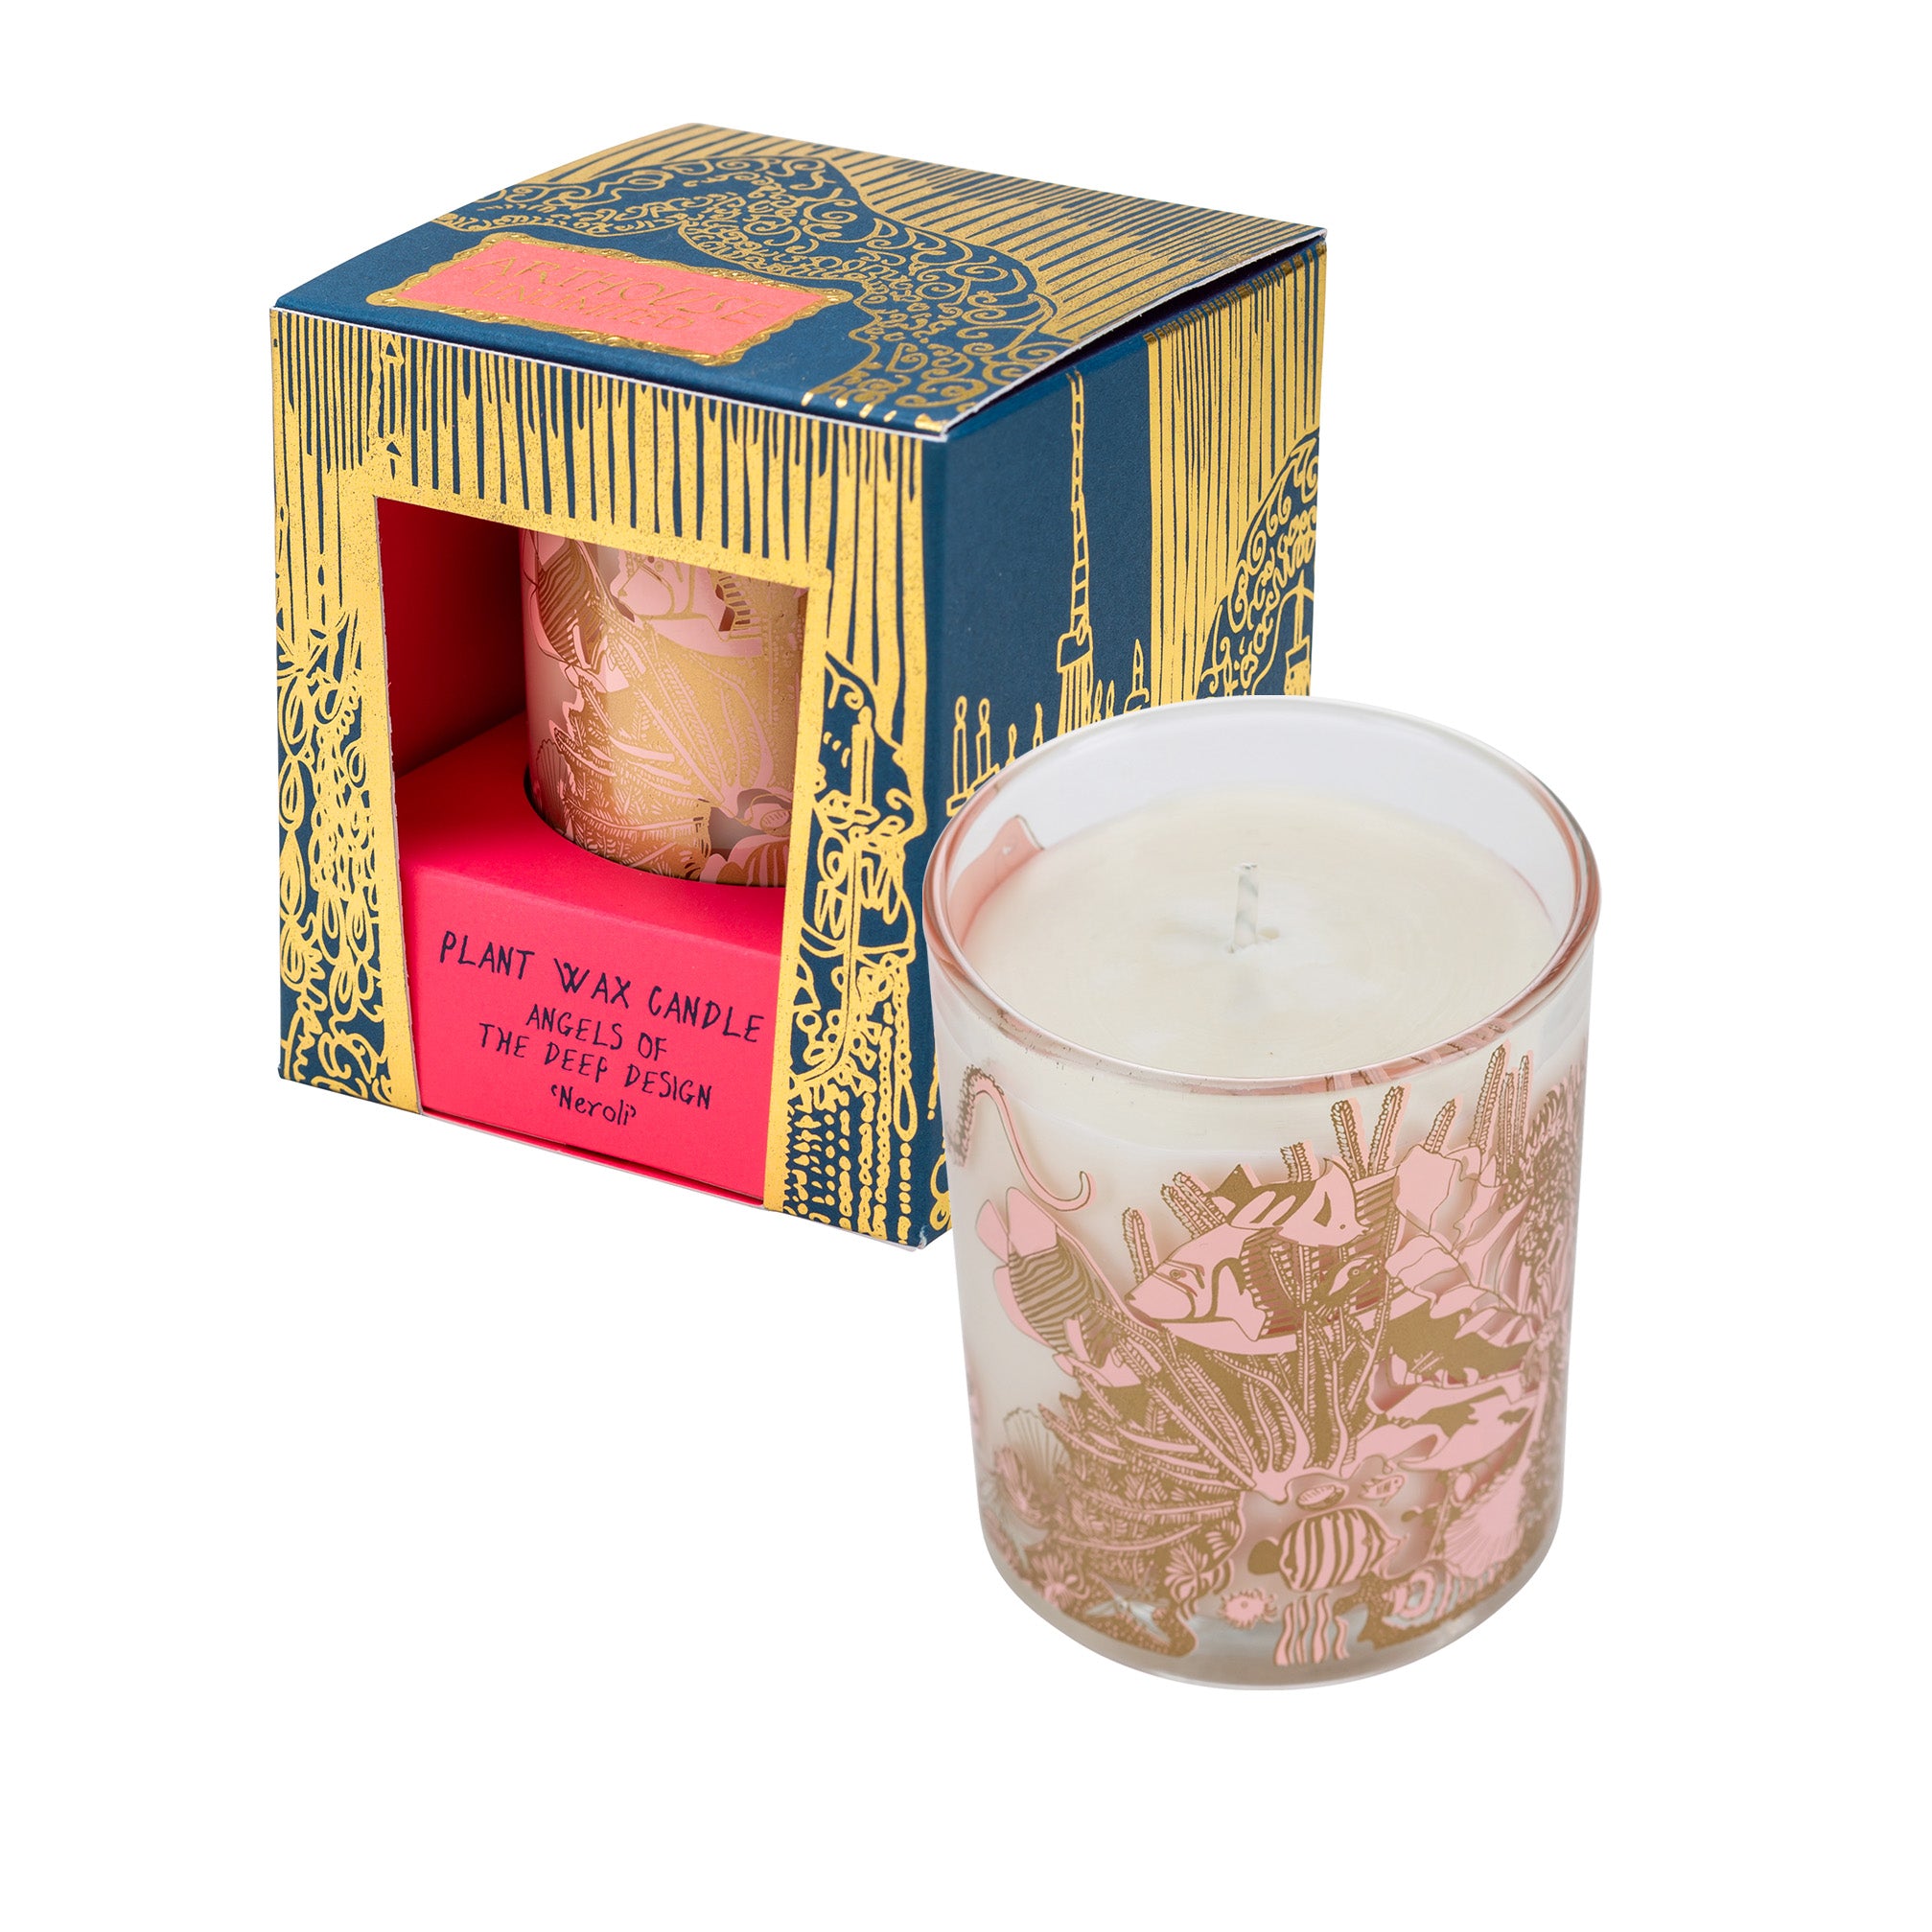 Angels of the Deep, Neroli Scented Plant Wax Candle, candle next to box